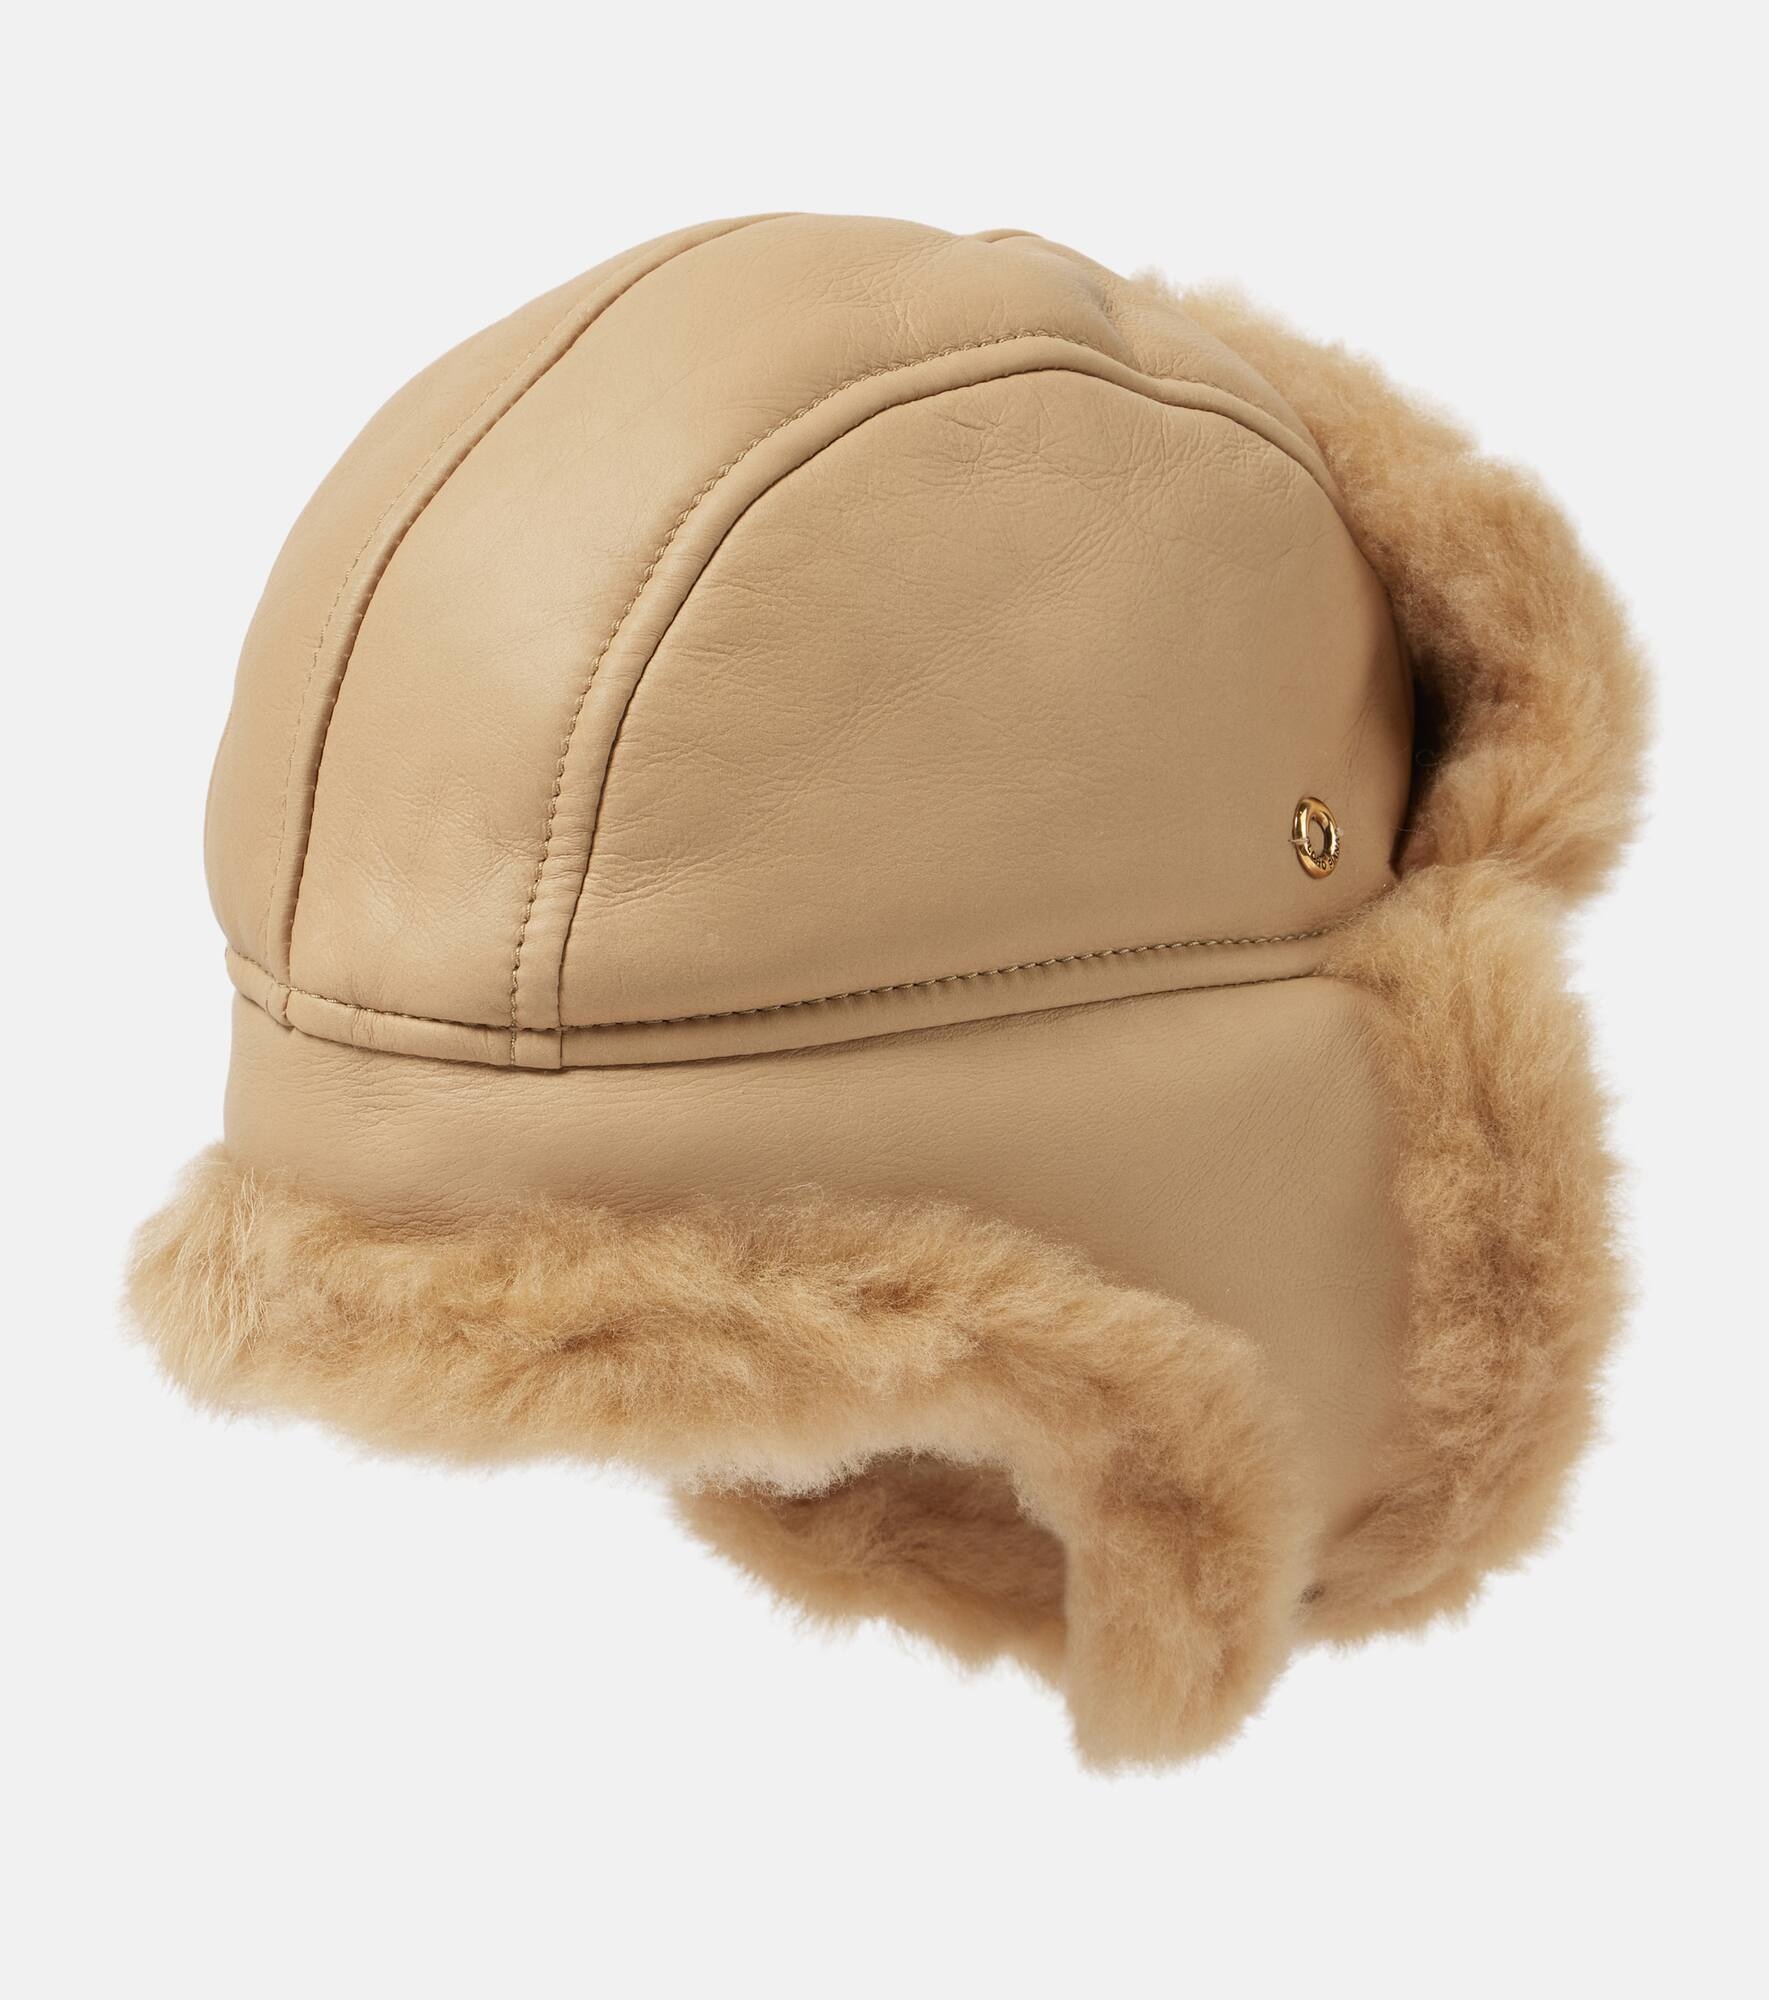 Alaskan shearling-lined leather hat - 4